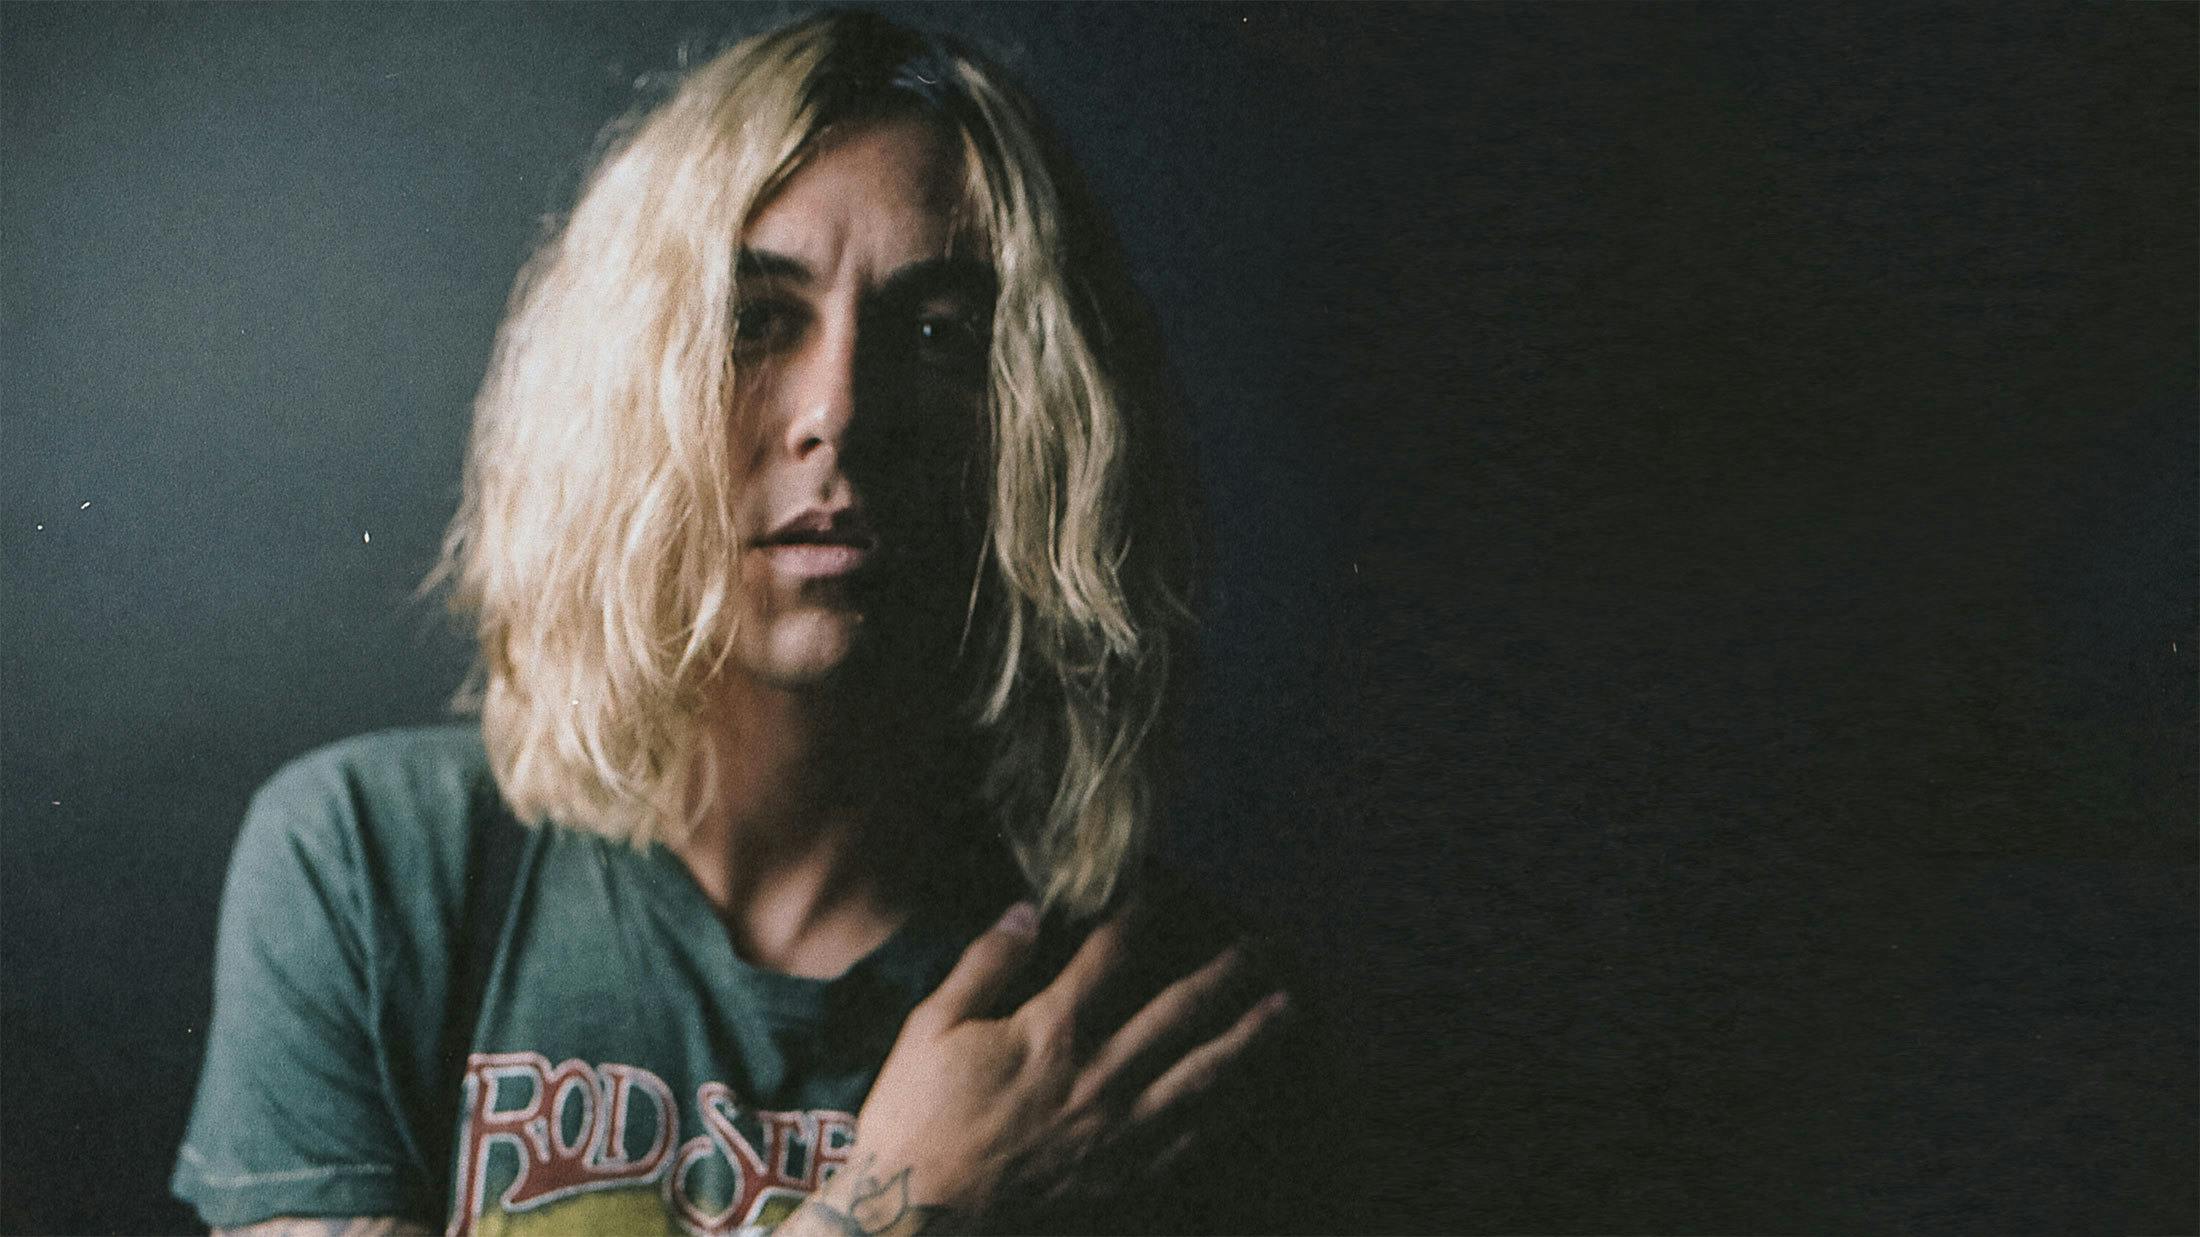 “I drank cobra blood in Southeast Asia”: 13 Questions with Kellin Quinn